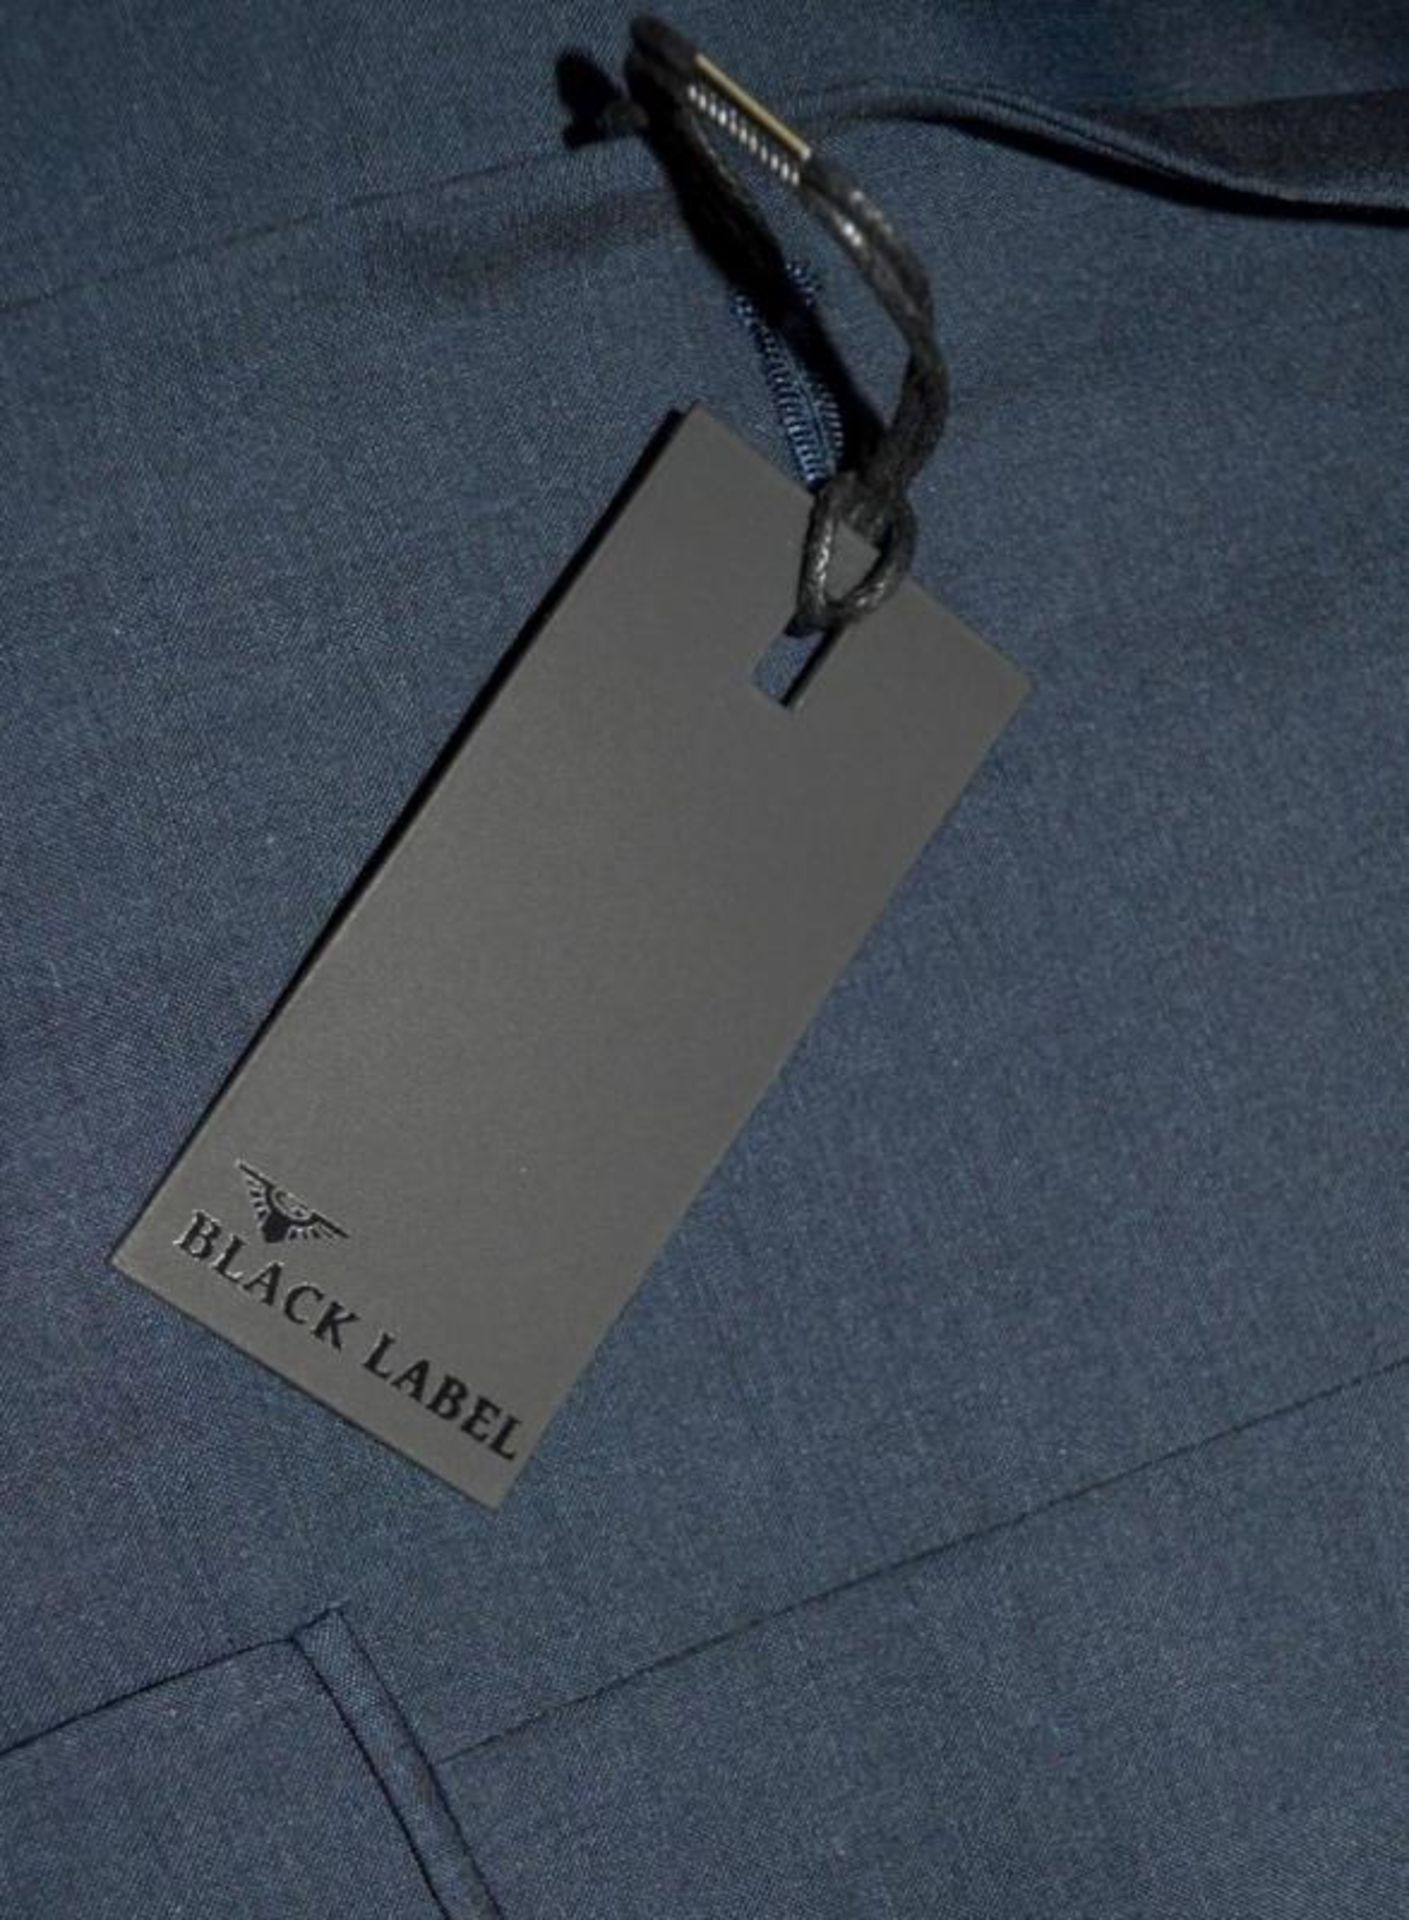 1 x PRE END Branded "LOKE" Mens Blazer Jacket With Waistcoat - New Stock With Tags - Recent Store - Image 3 of 5